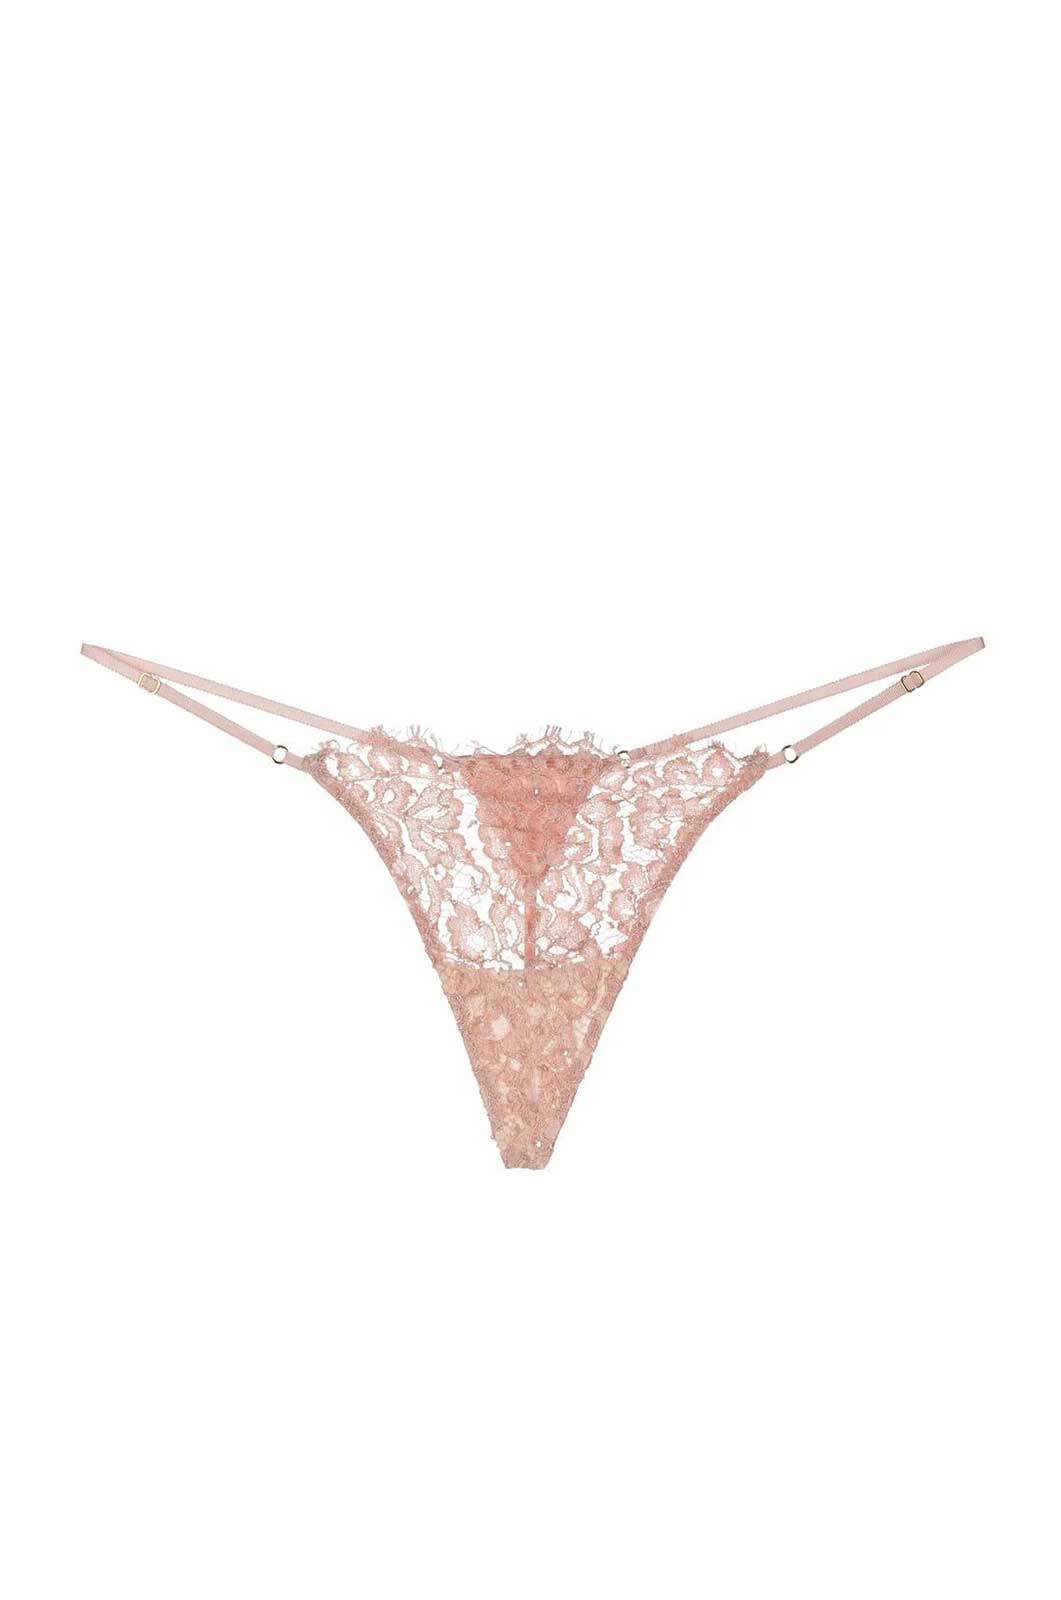 BEADED LACE G-STRING